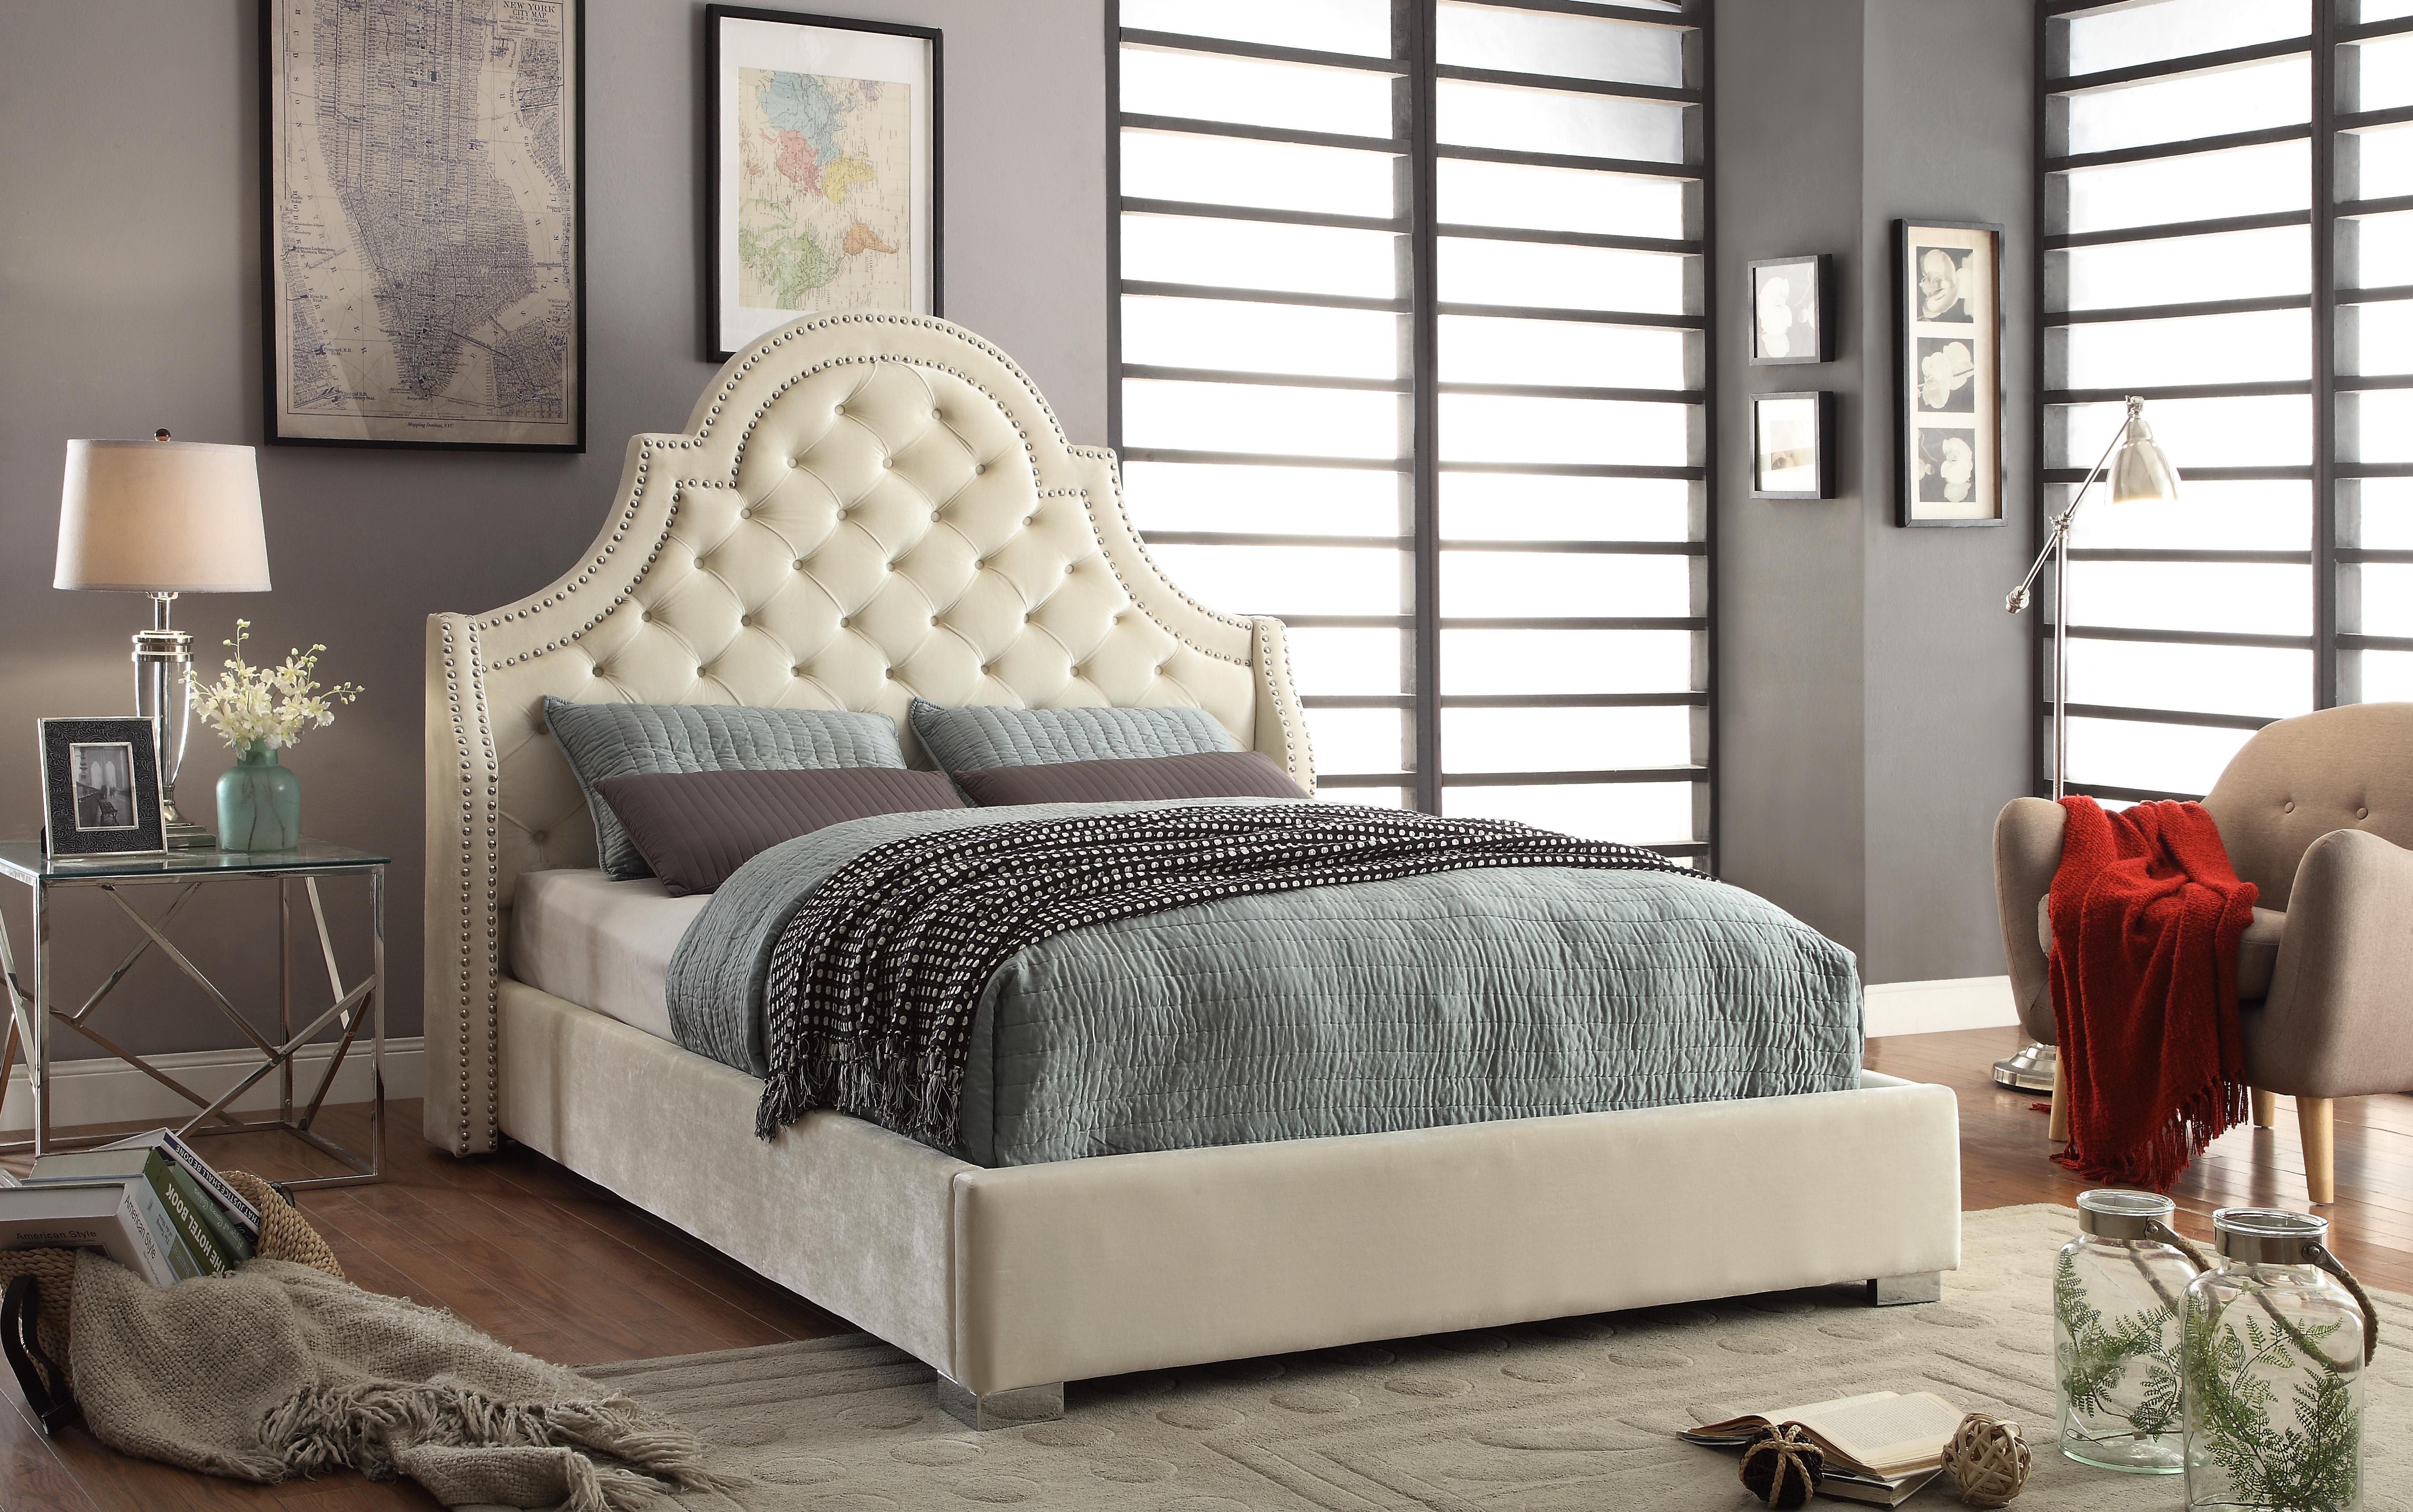 

    
Meridian Madison King Size Bed in Cream Chrome Nailheads Contemporary Style
